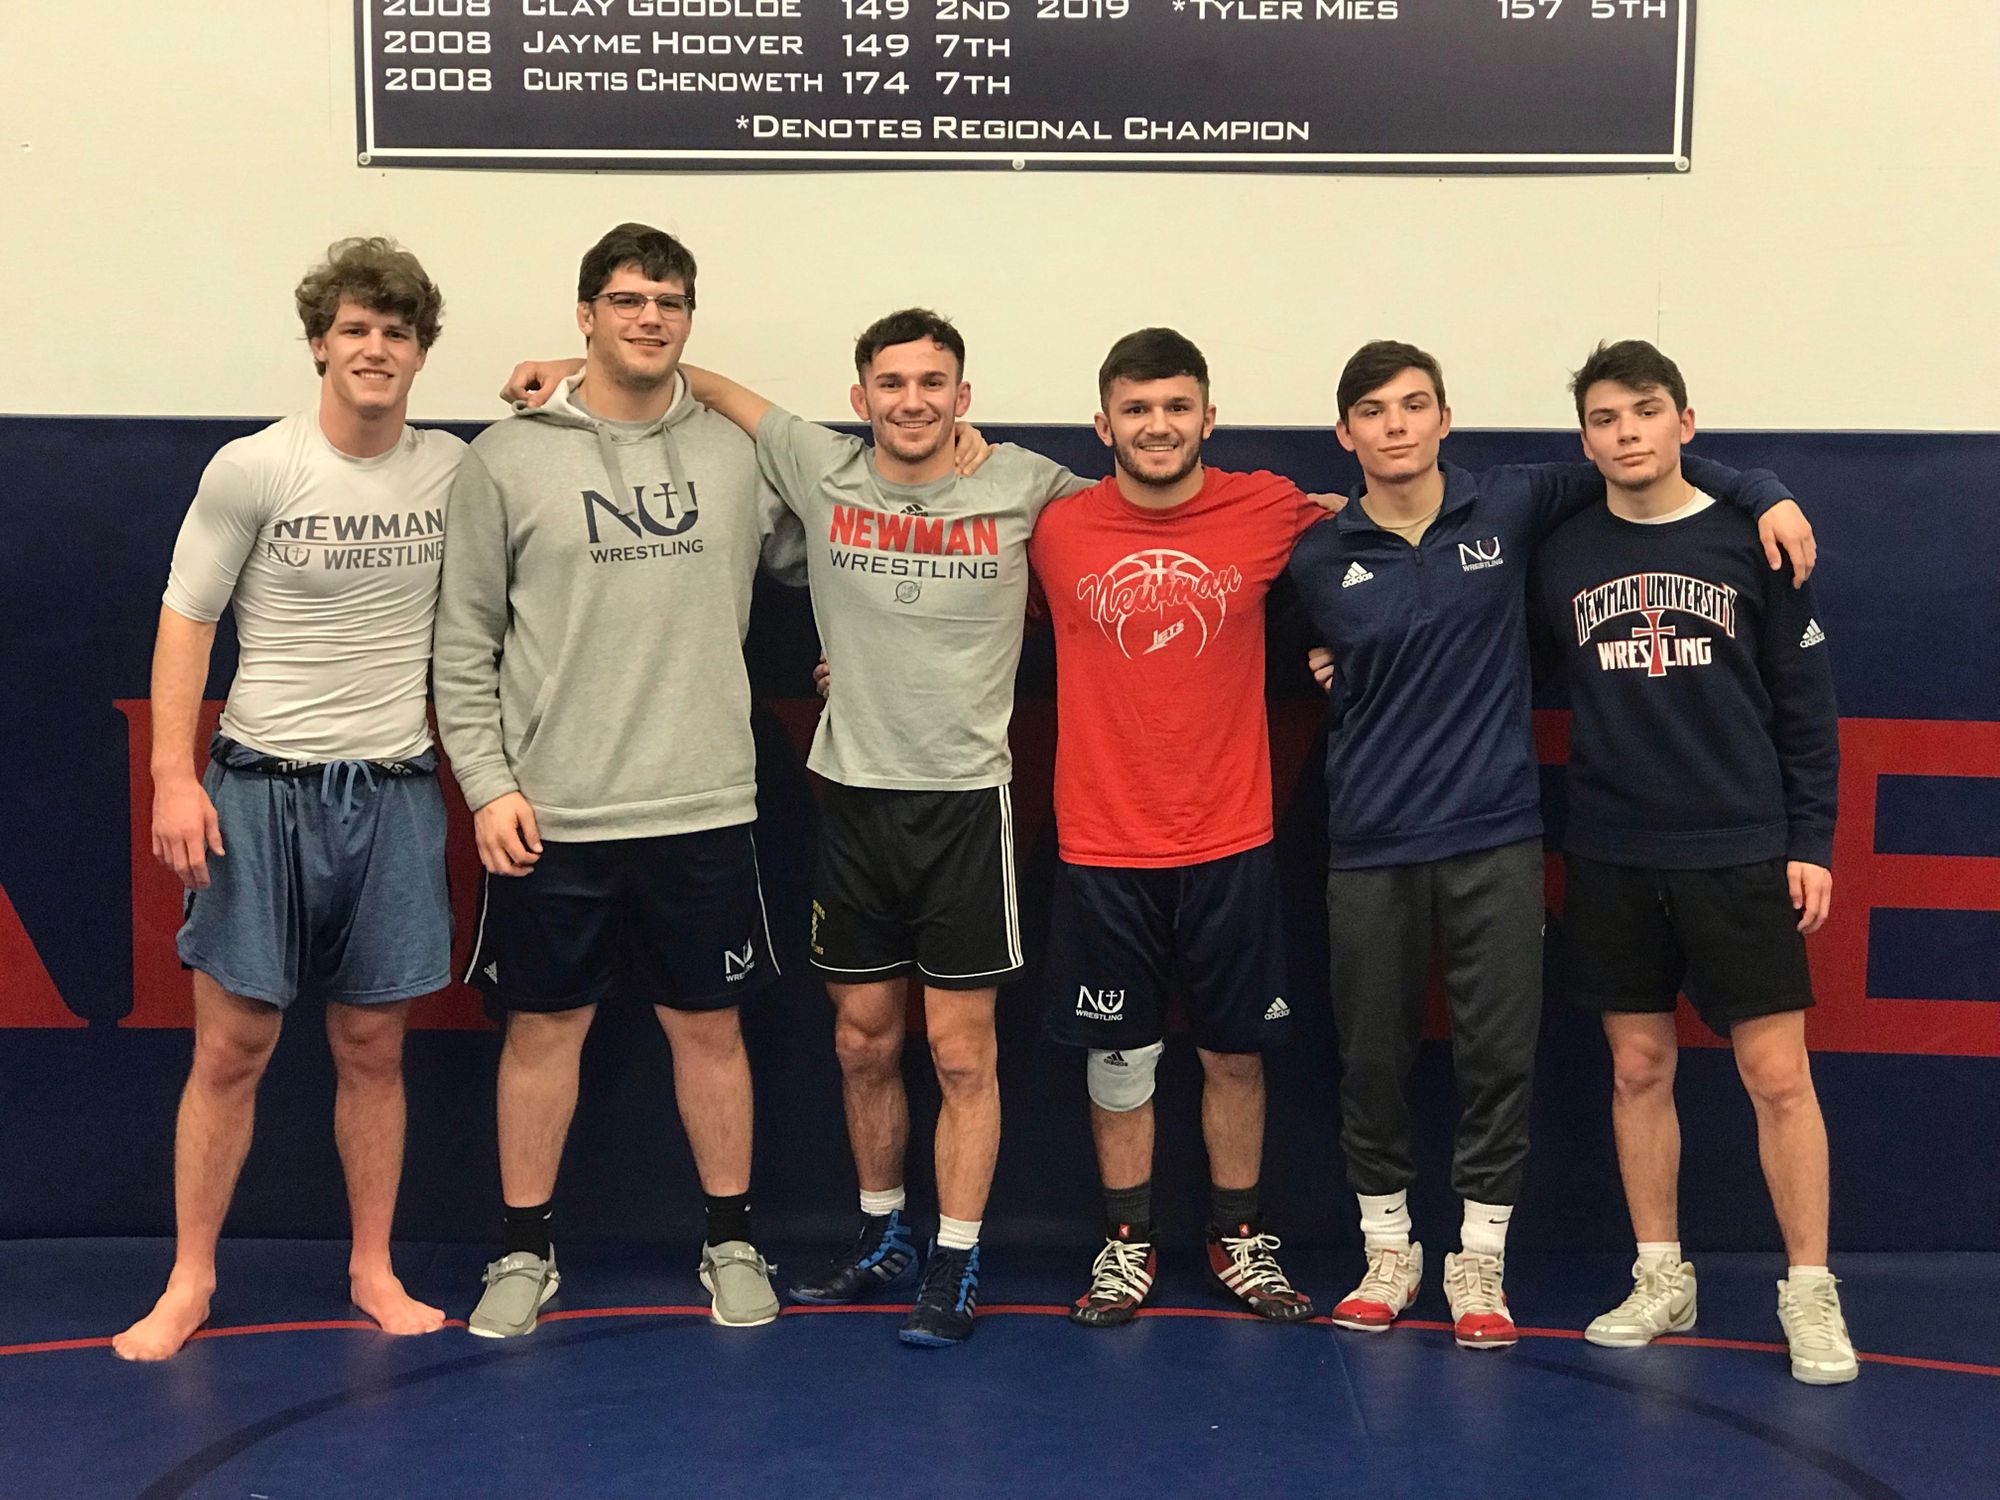 Newman wrestling: a brotherly affair